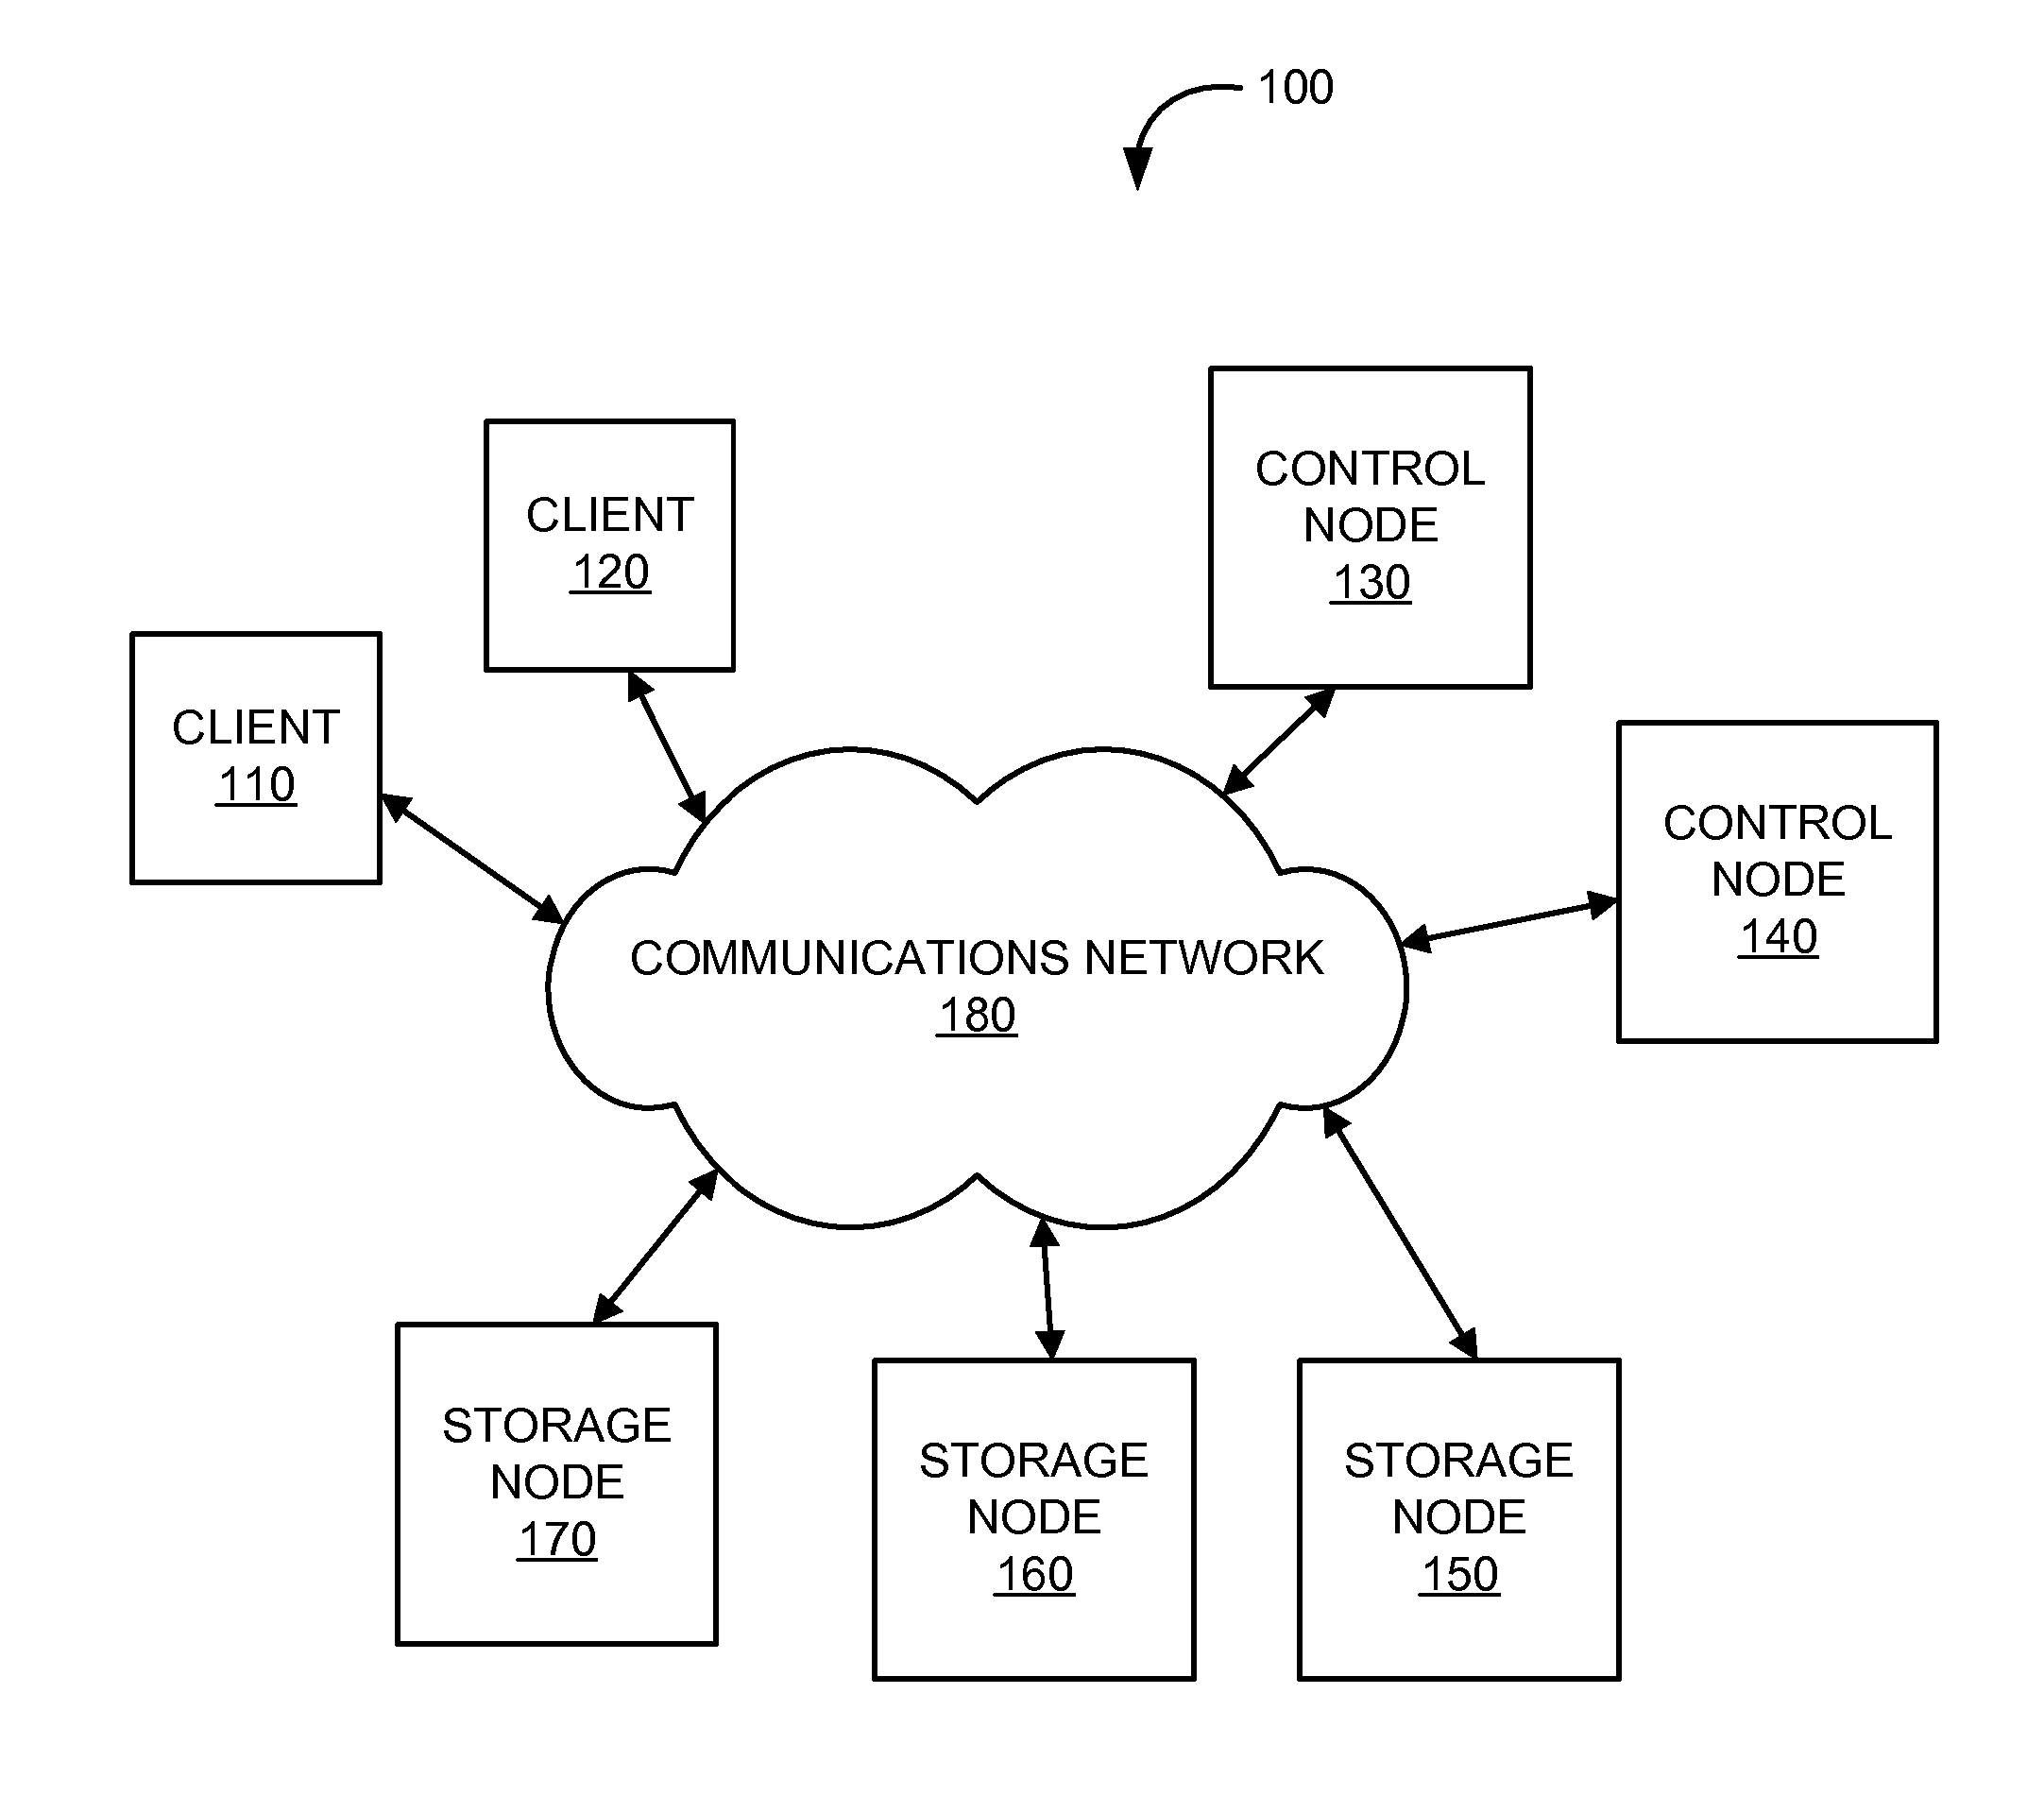 Transparent redirection and load-balancing in a storage network